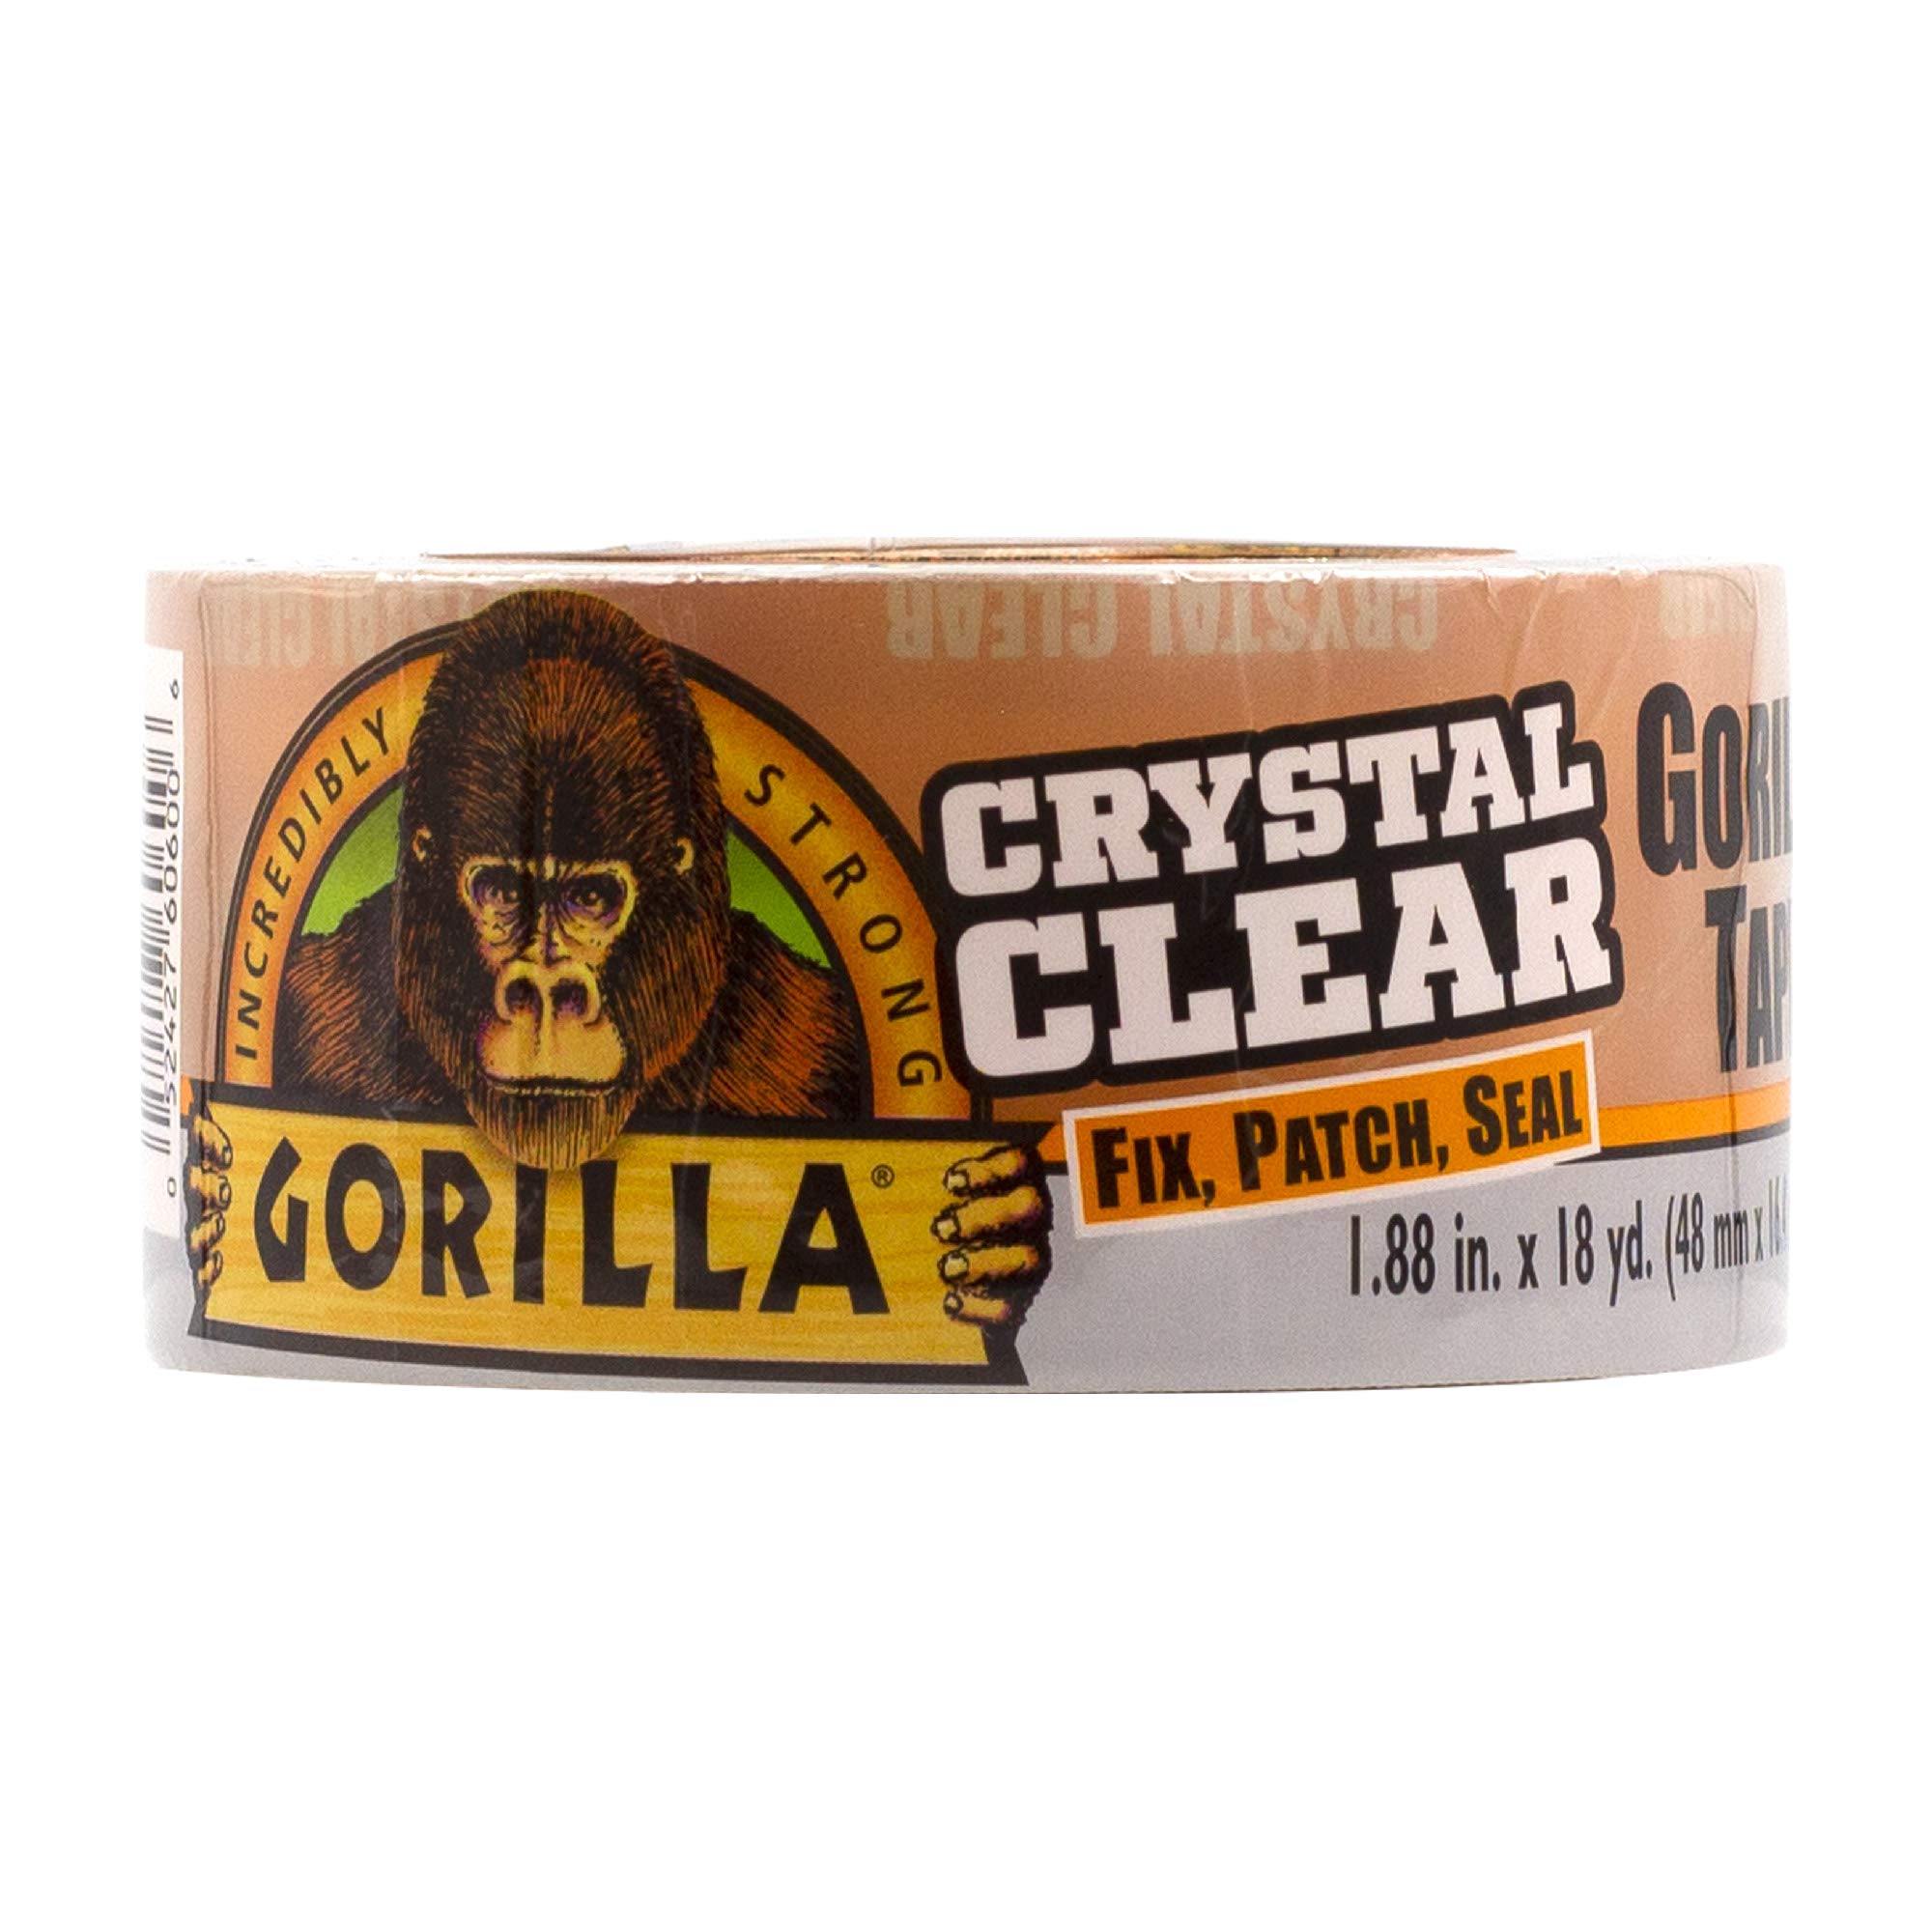 Gorilla Crystal Clear Duct Tape, 1.88” x 18 yd, Clear, ...